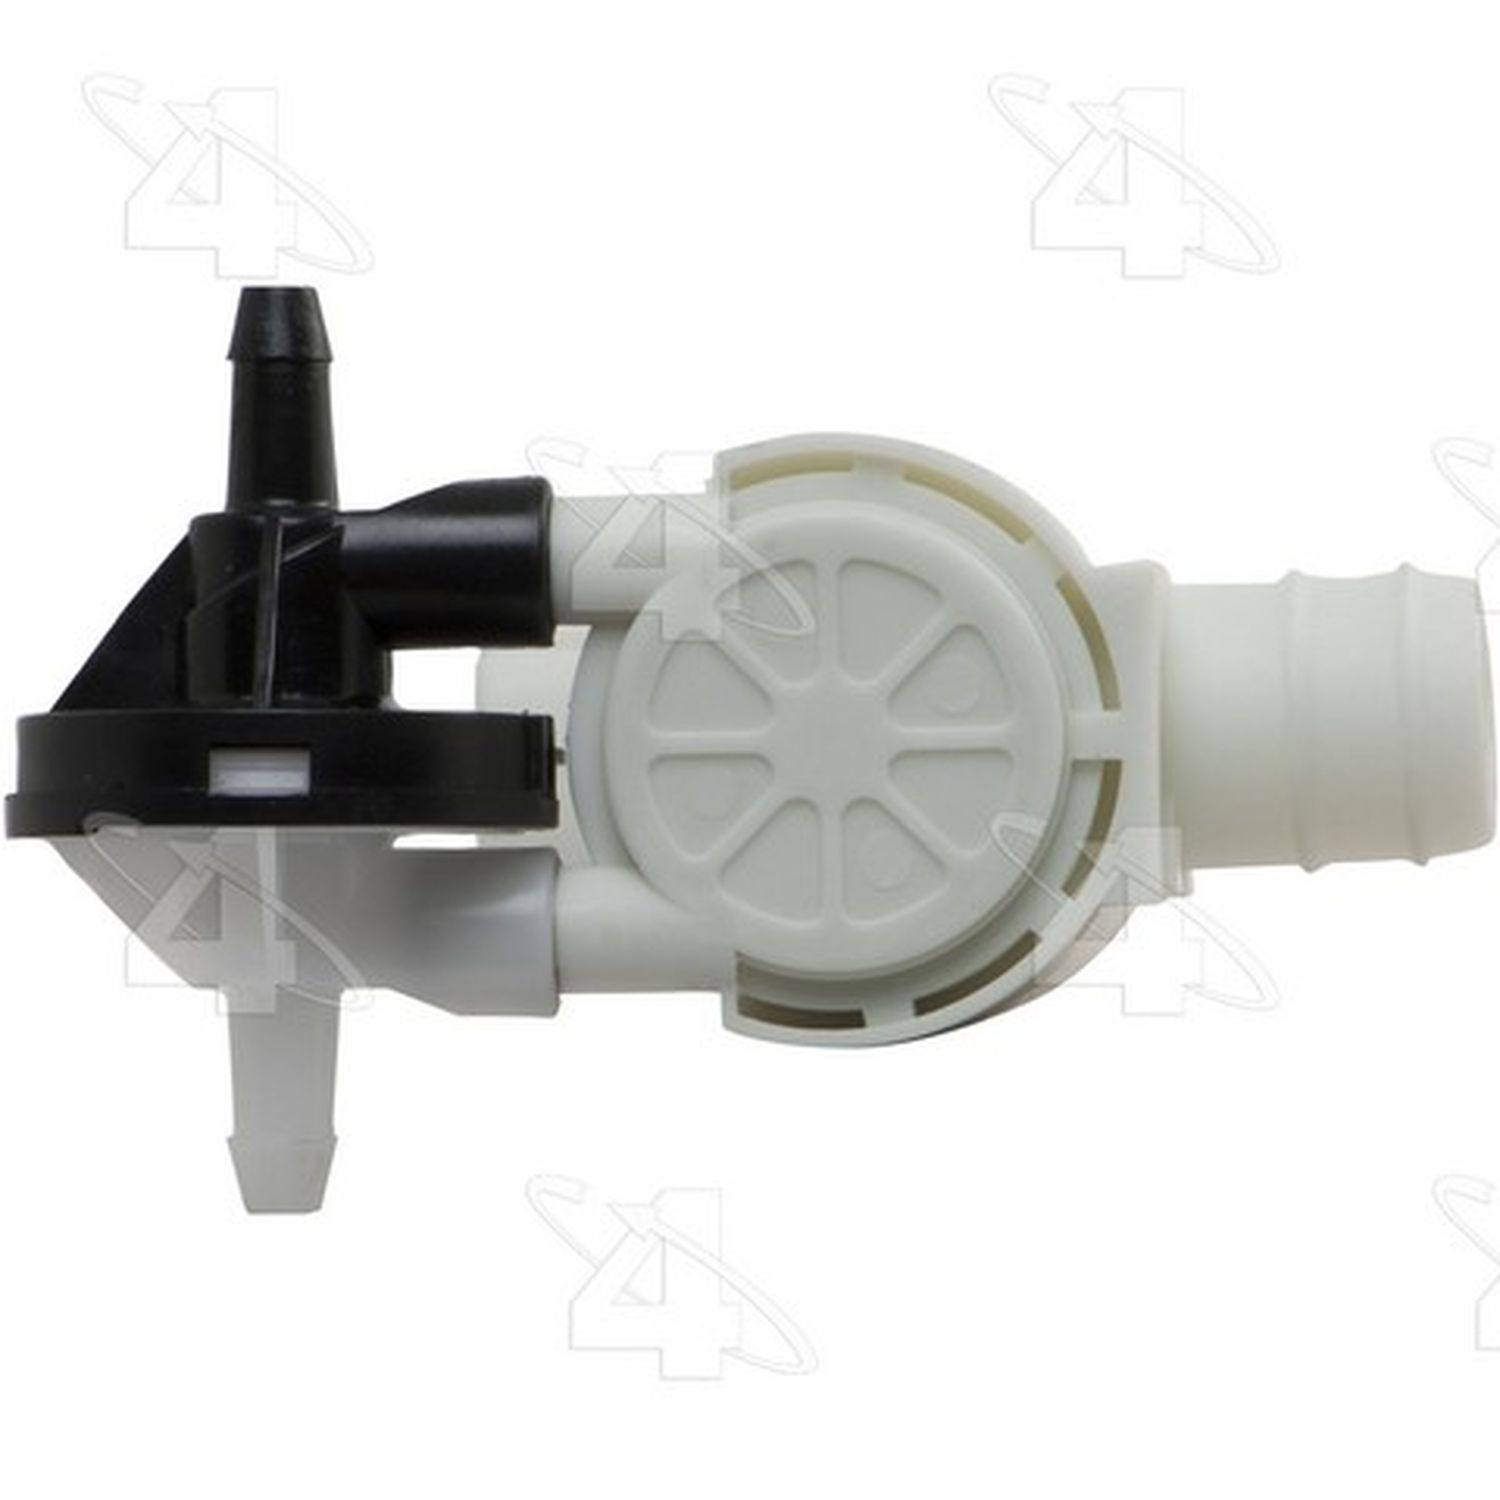 Windshield Washer Pump Compatible With Select 03-19 Infiniti Mazda Nissan Models 